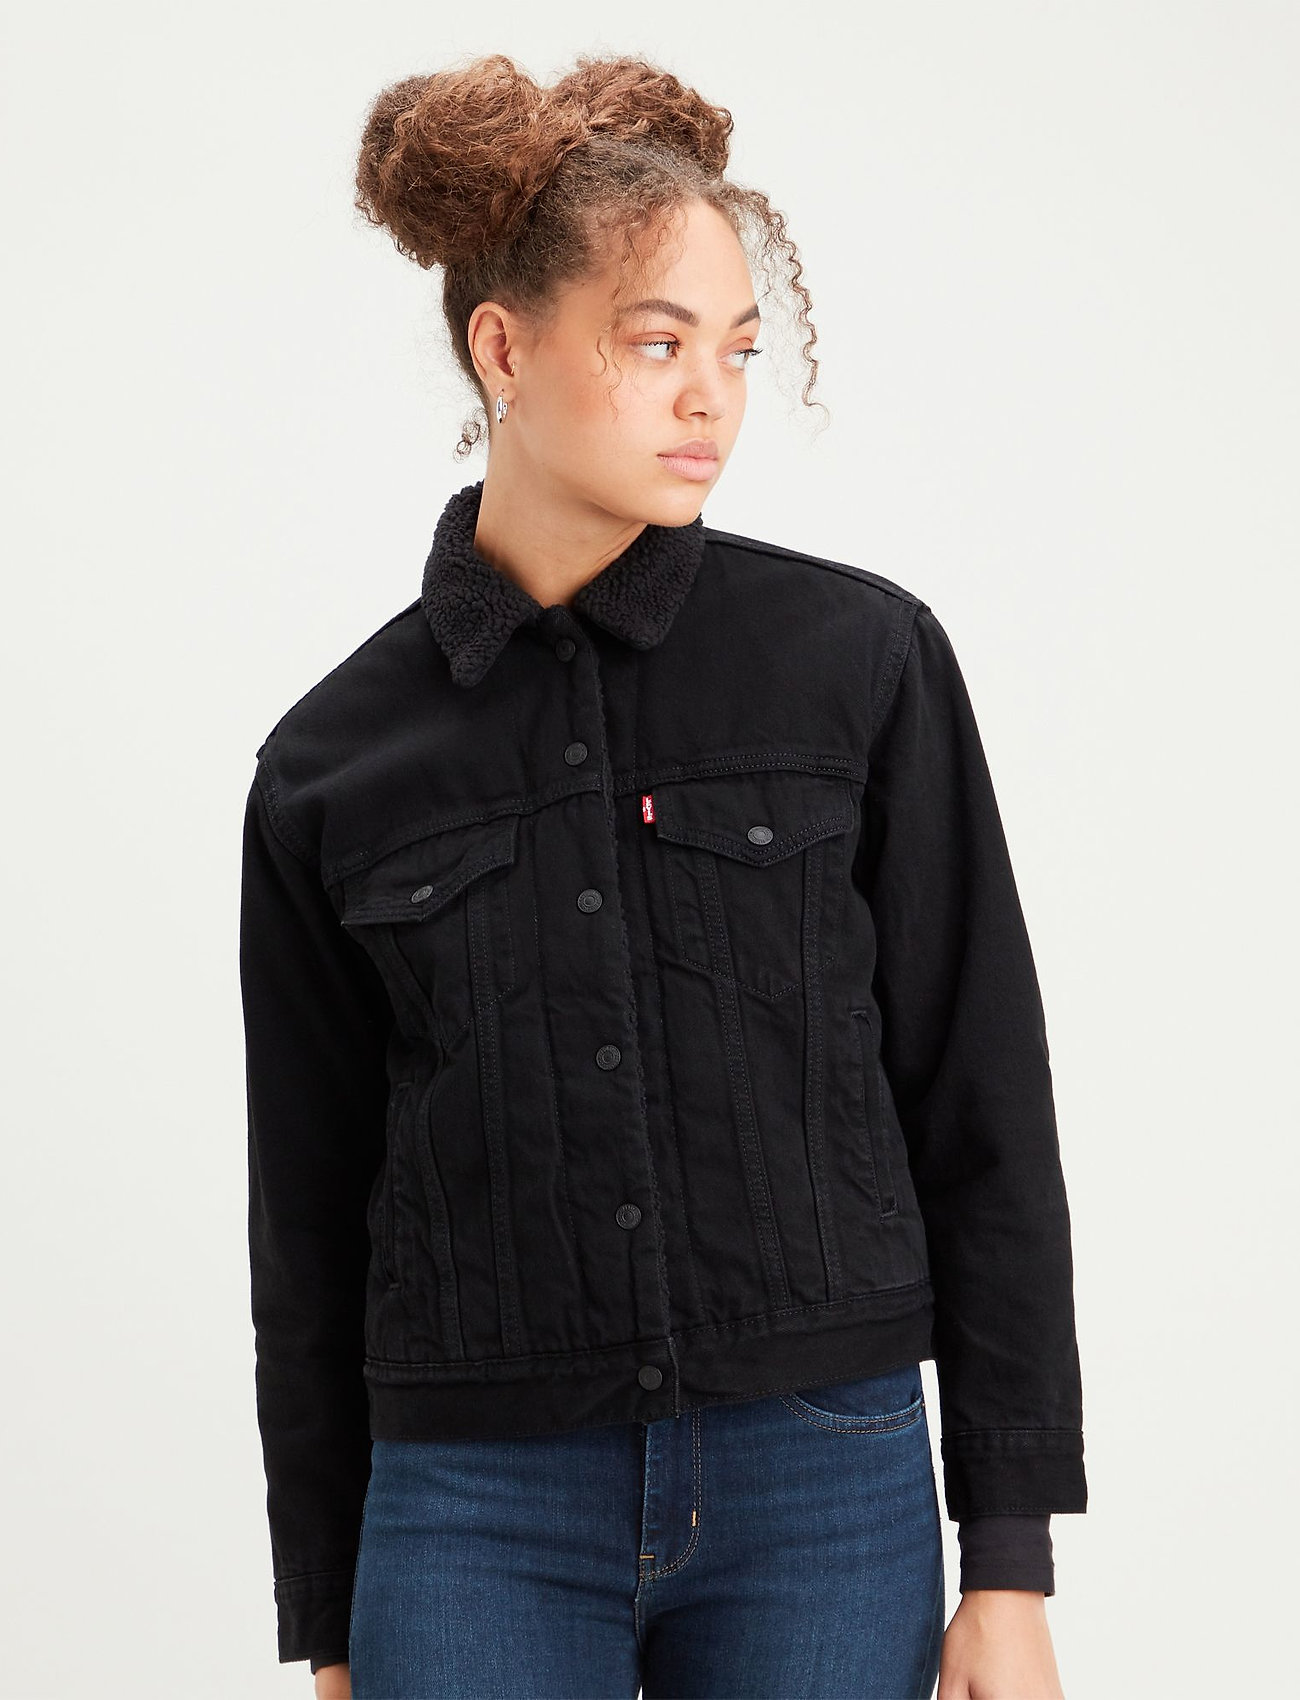 LEVI´S Women Exbf Sherpa Trucker Yes Black - 140 €. Buy Denim jackets from  LEVI´S Women online at . Fast delivery and easy returns